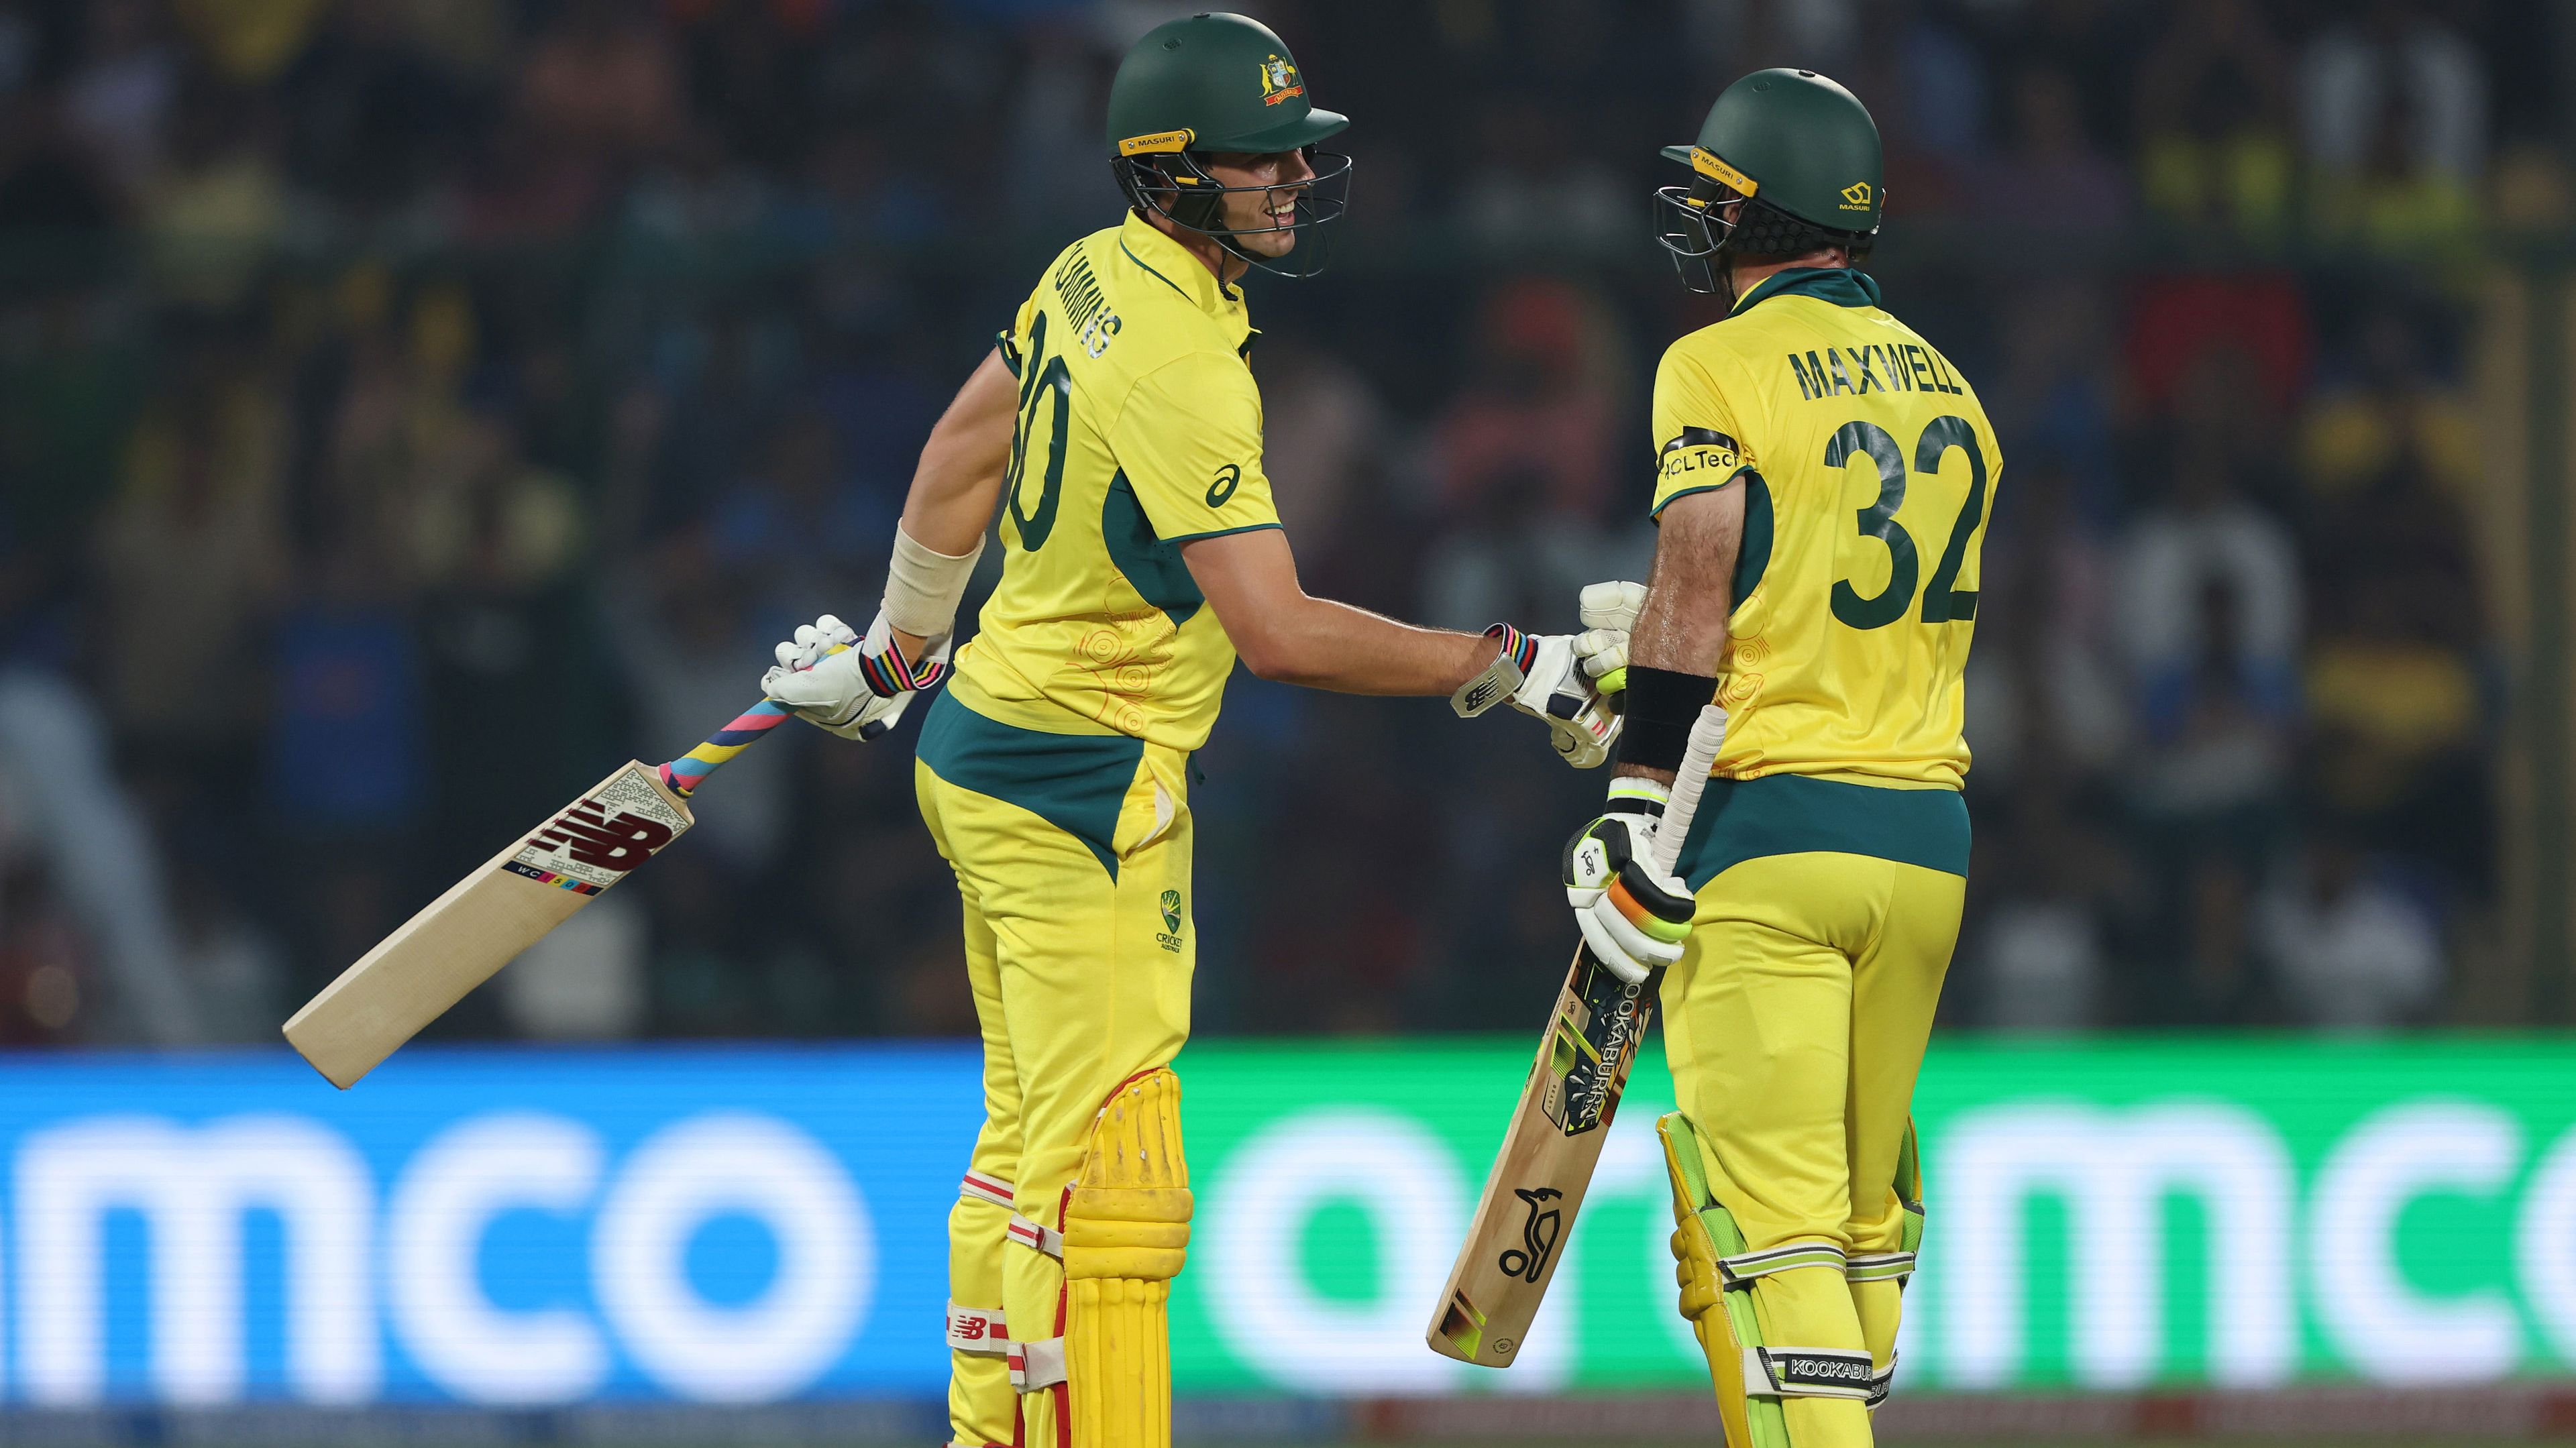 Glenn Maxwell and Pat Cummins come together during their record-breaking partnership against the Netherlands in the ODI World Cup.